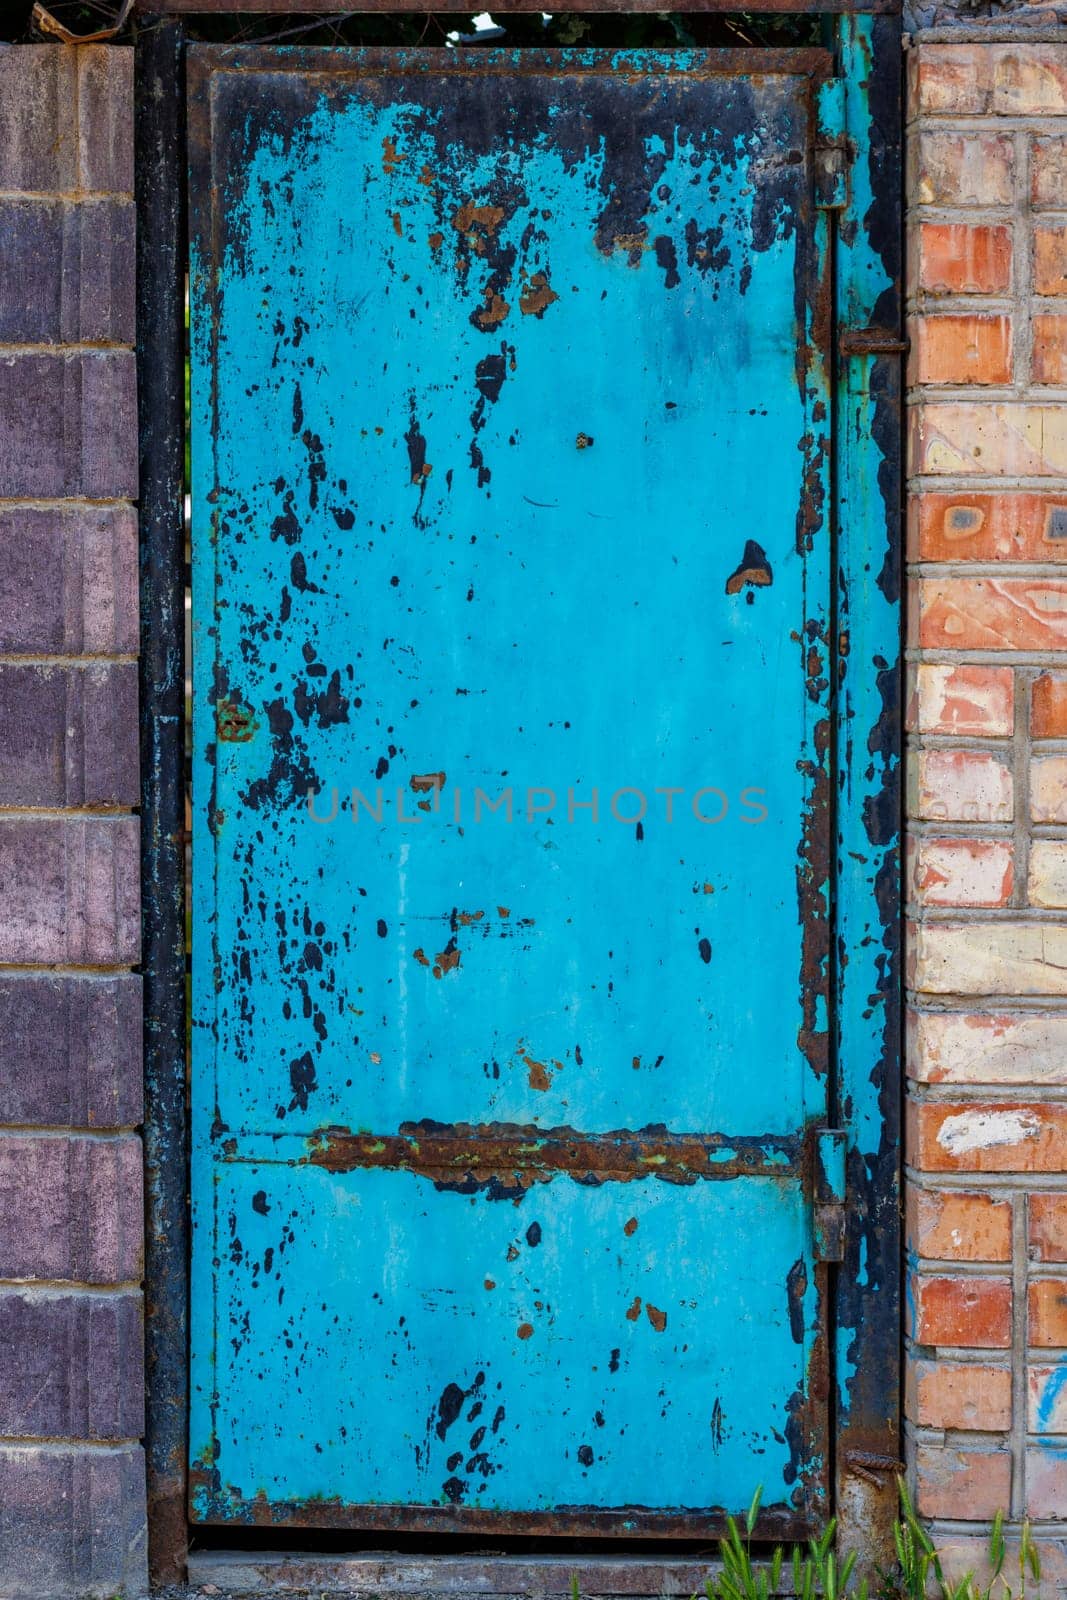 A blue steel door in a brick wall or fence, peeled off paint